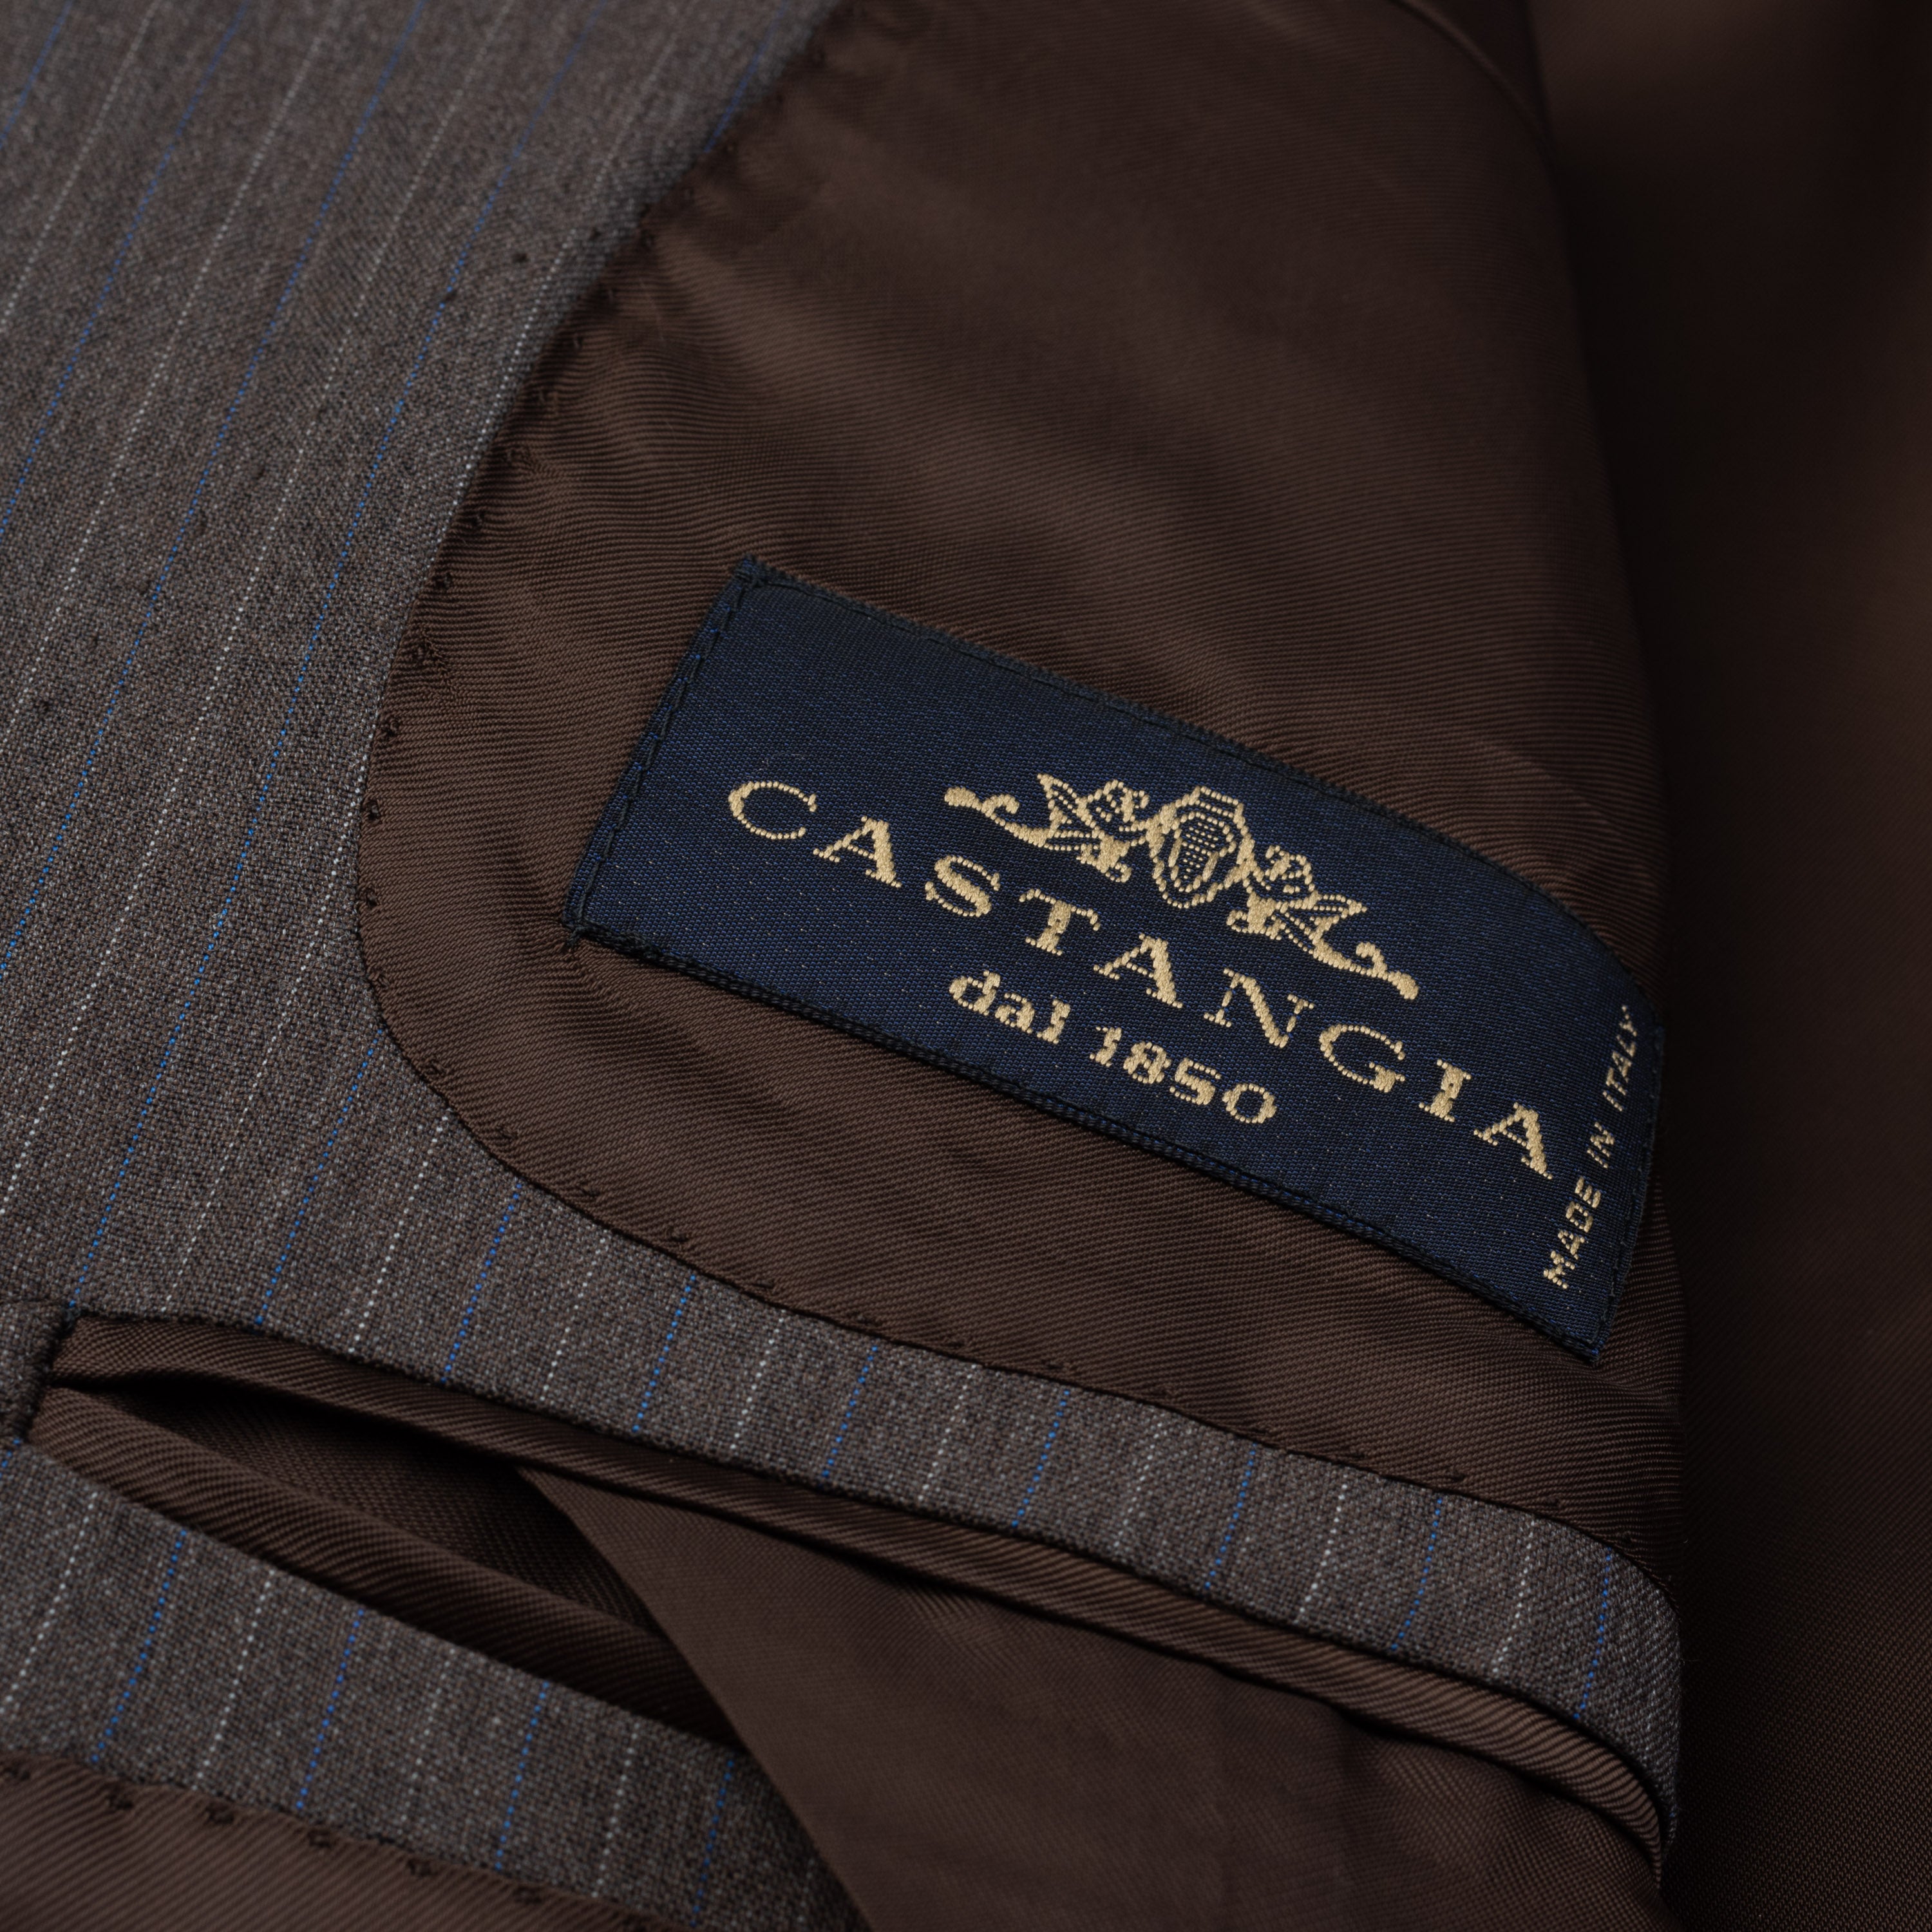 CASTANGIA 1850 Taupe Gray Striped Wool-Cotton Business Suit NEW CASTANGIA